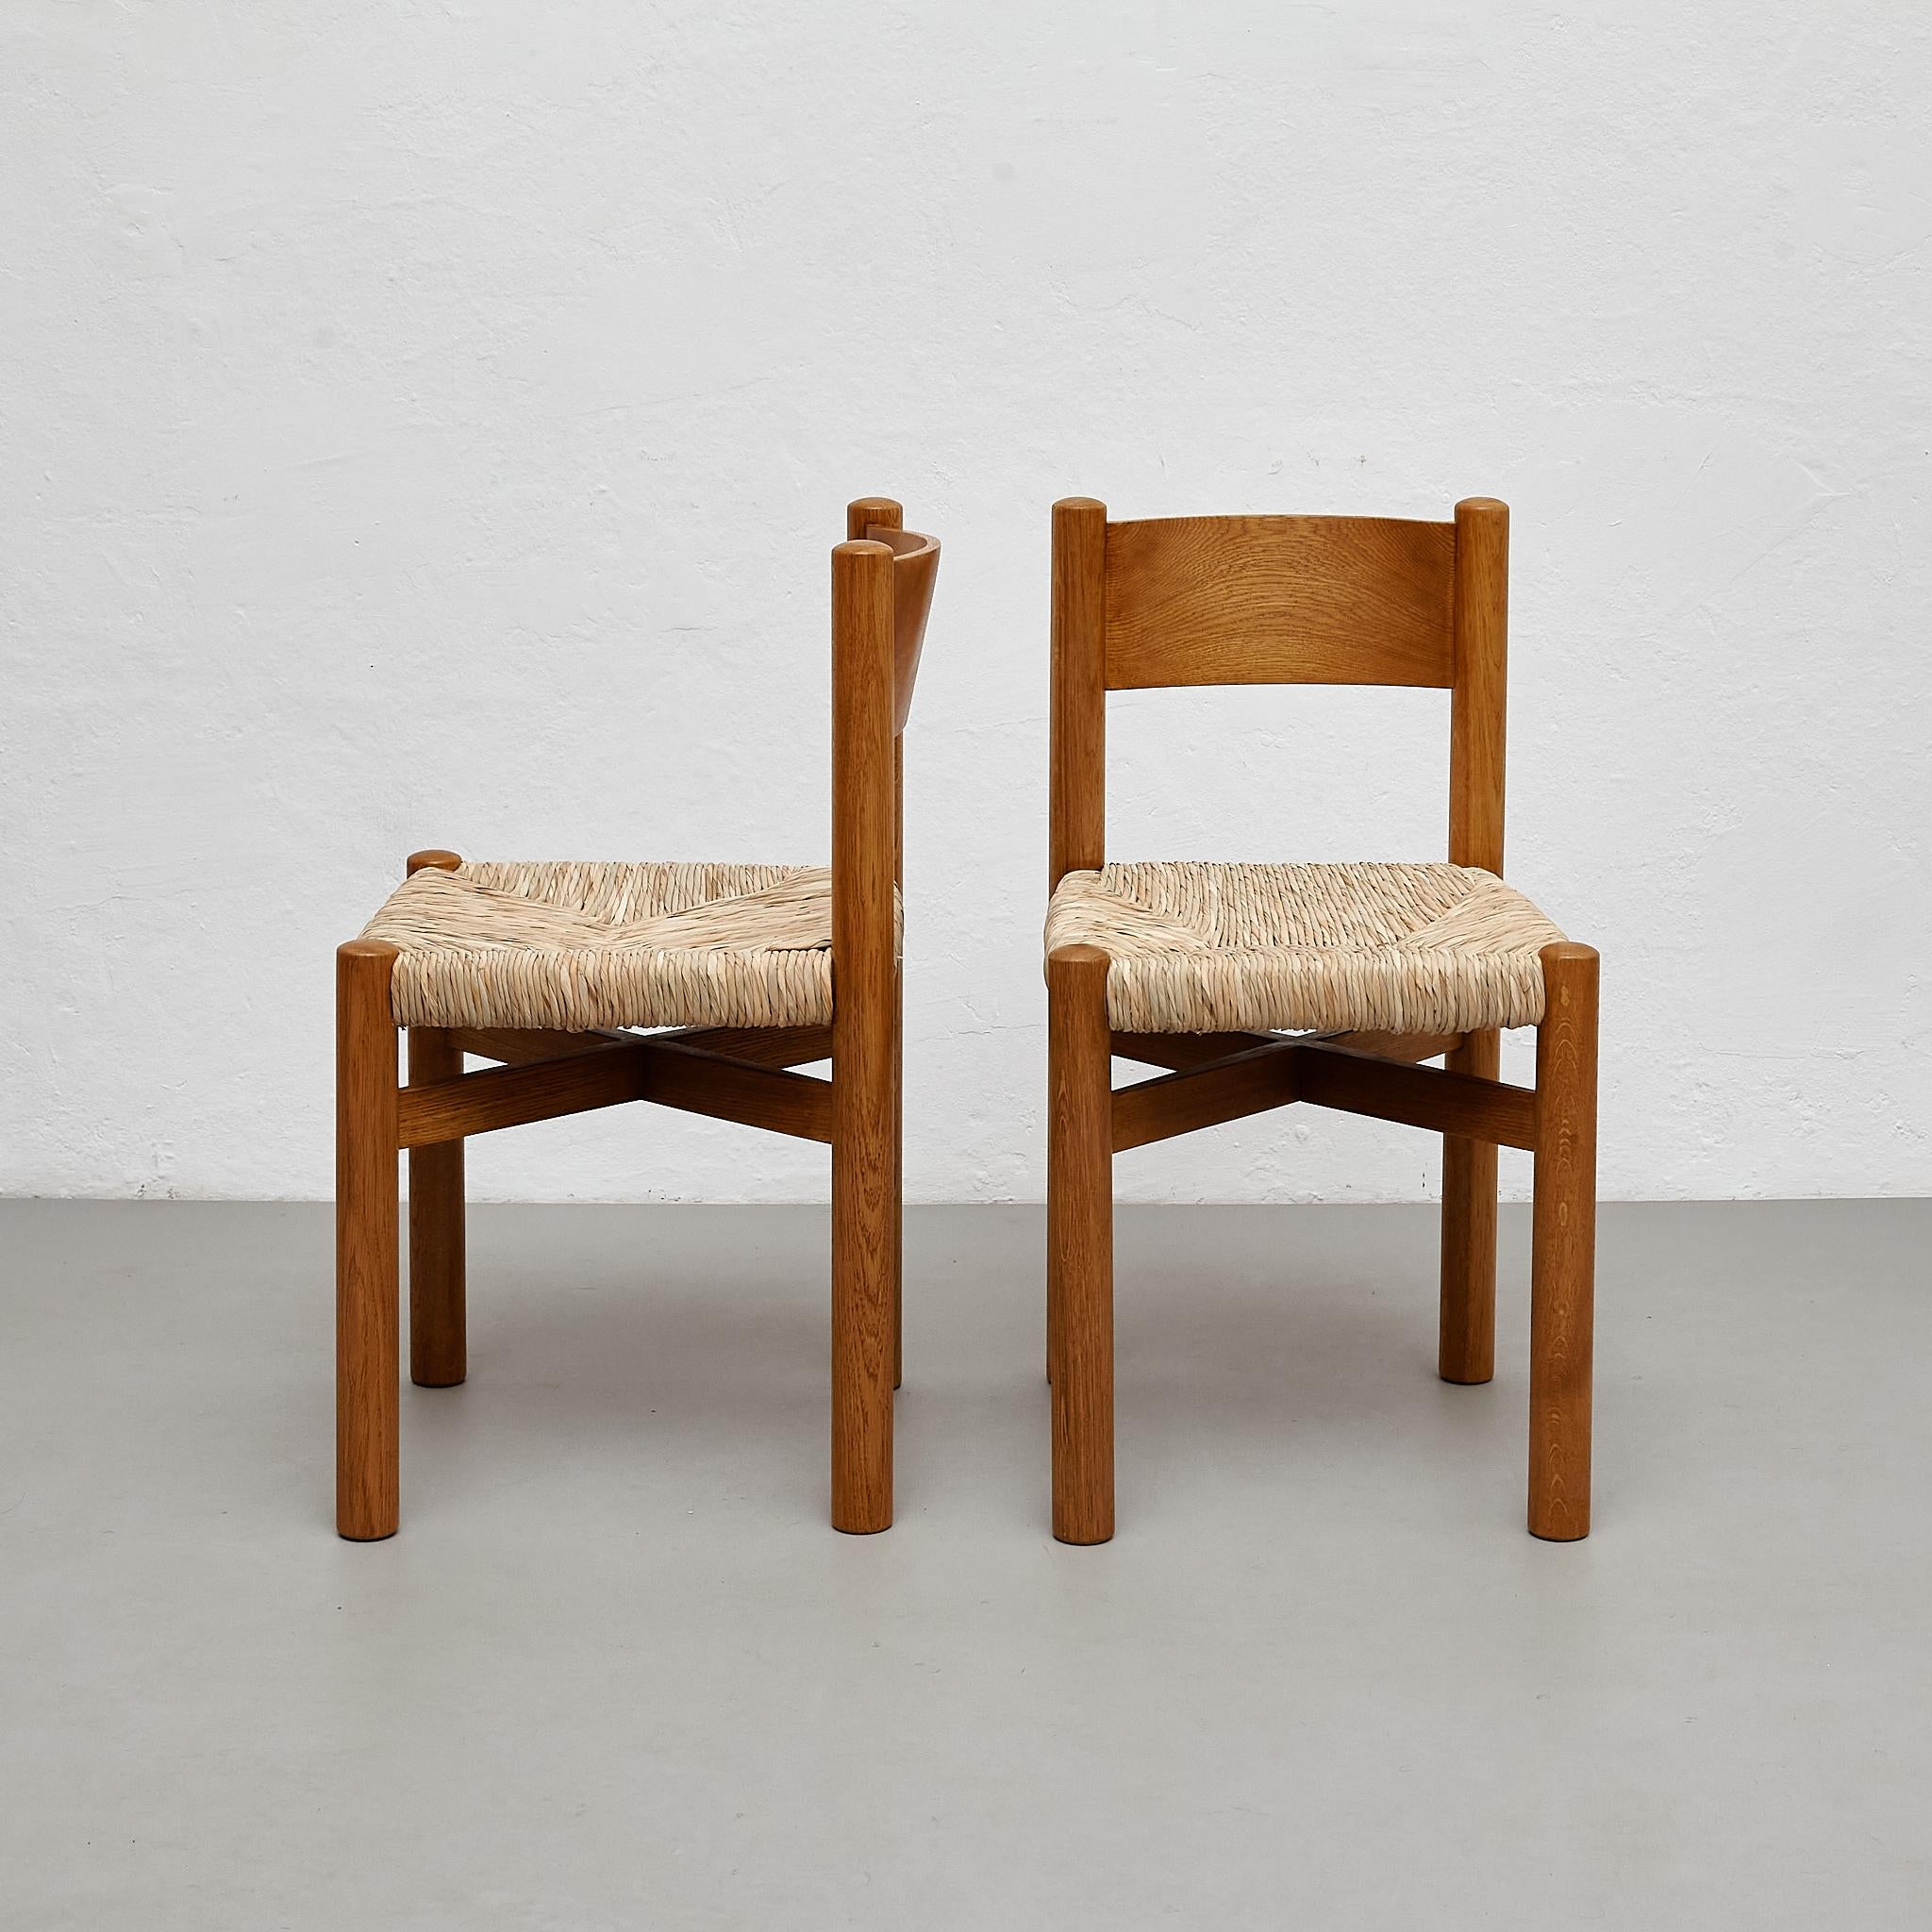 Set of 2 chairs After Charlotte Perriand.

By unknown manufacturer, from France, circa 1980.

Dimensions:
D 39 cm x W 46 cm x H 74 cm (SH 44 cm)

Materials:
Wood and rattan.

In original condition, with minor wear consistent with age and use,